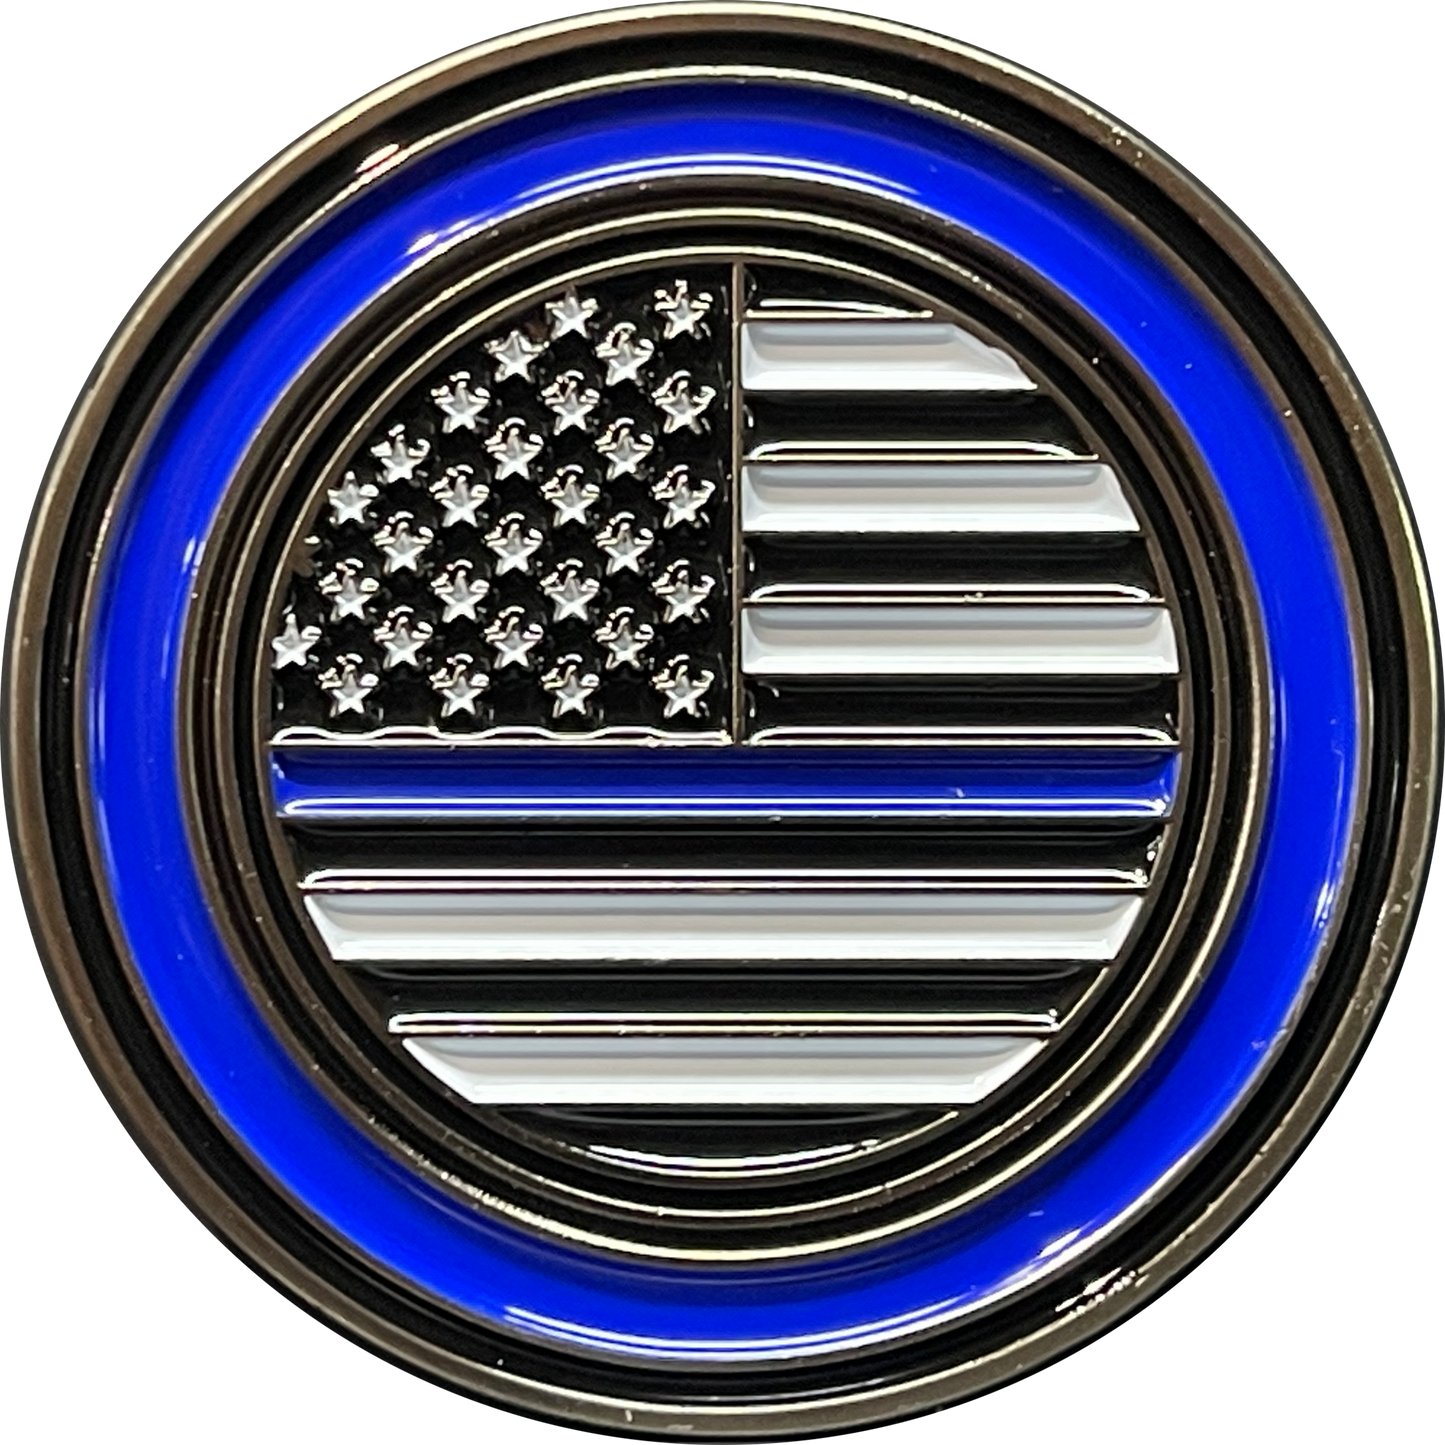 BL6-006 She is a powHERful Warrior thin blue line Police Border Patrol CBP Military Tactical Female Challenge Coin Agent Officer CBP ATF LAPD Deputy Sheriff